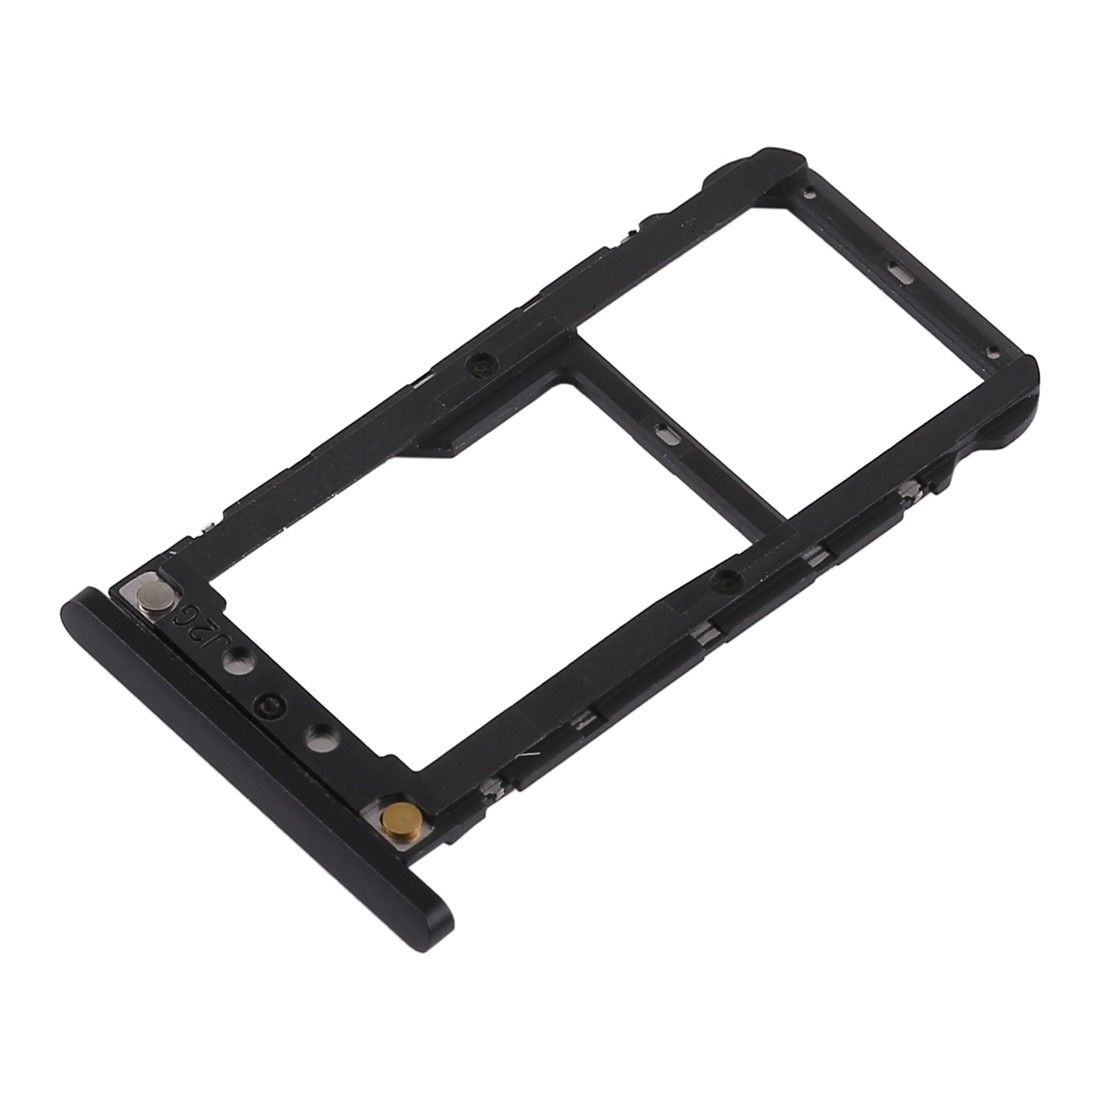 OEM Dual SIM Card Tray Holder Replace Part for Xiaomi Mi Max 3 - Black